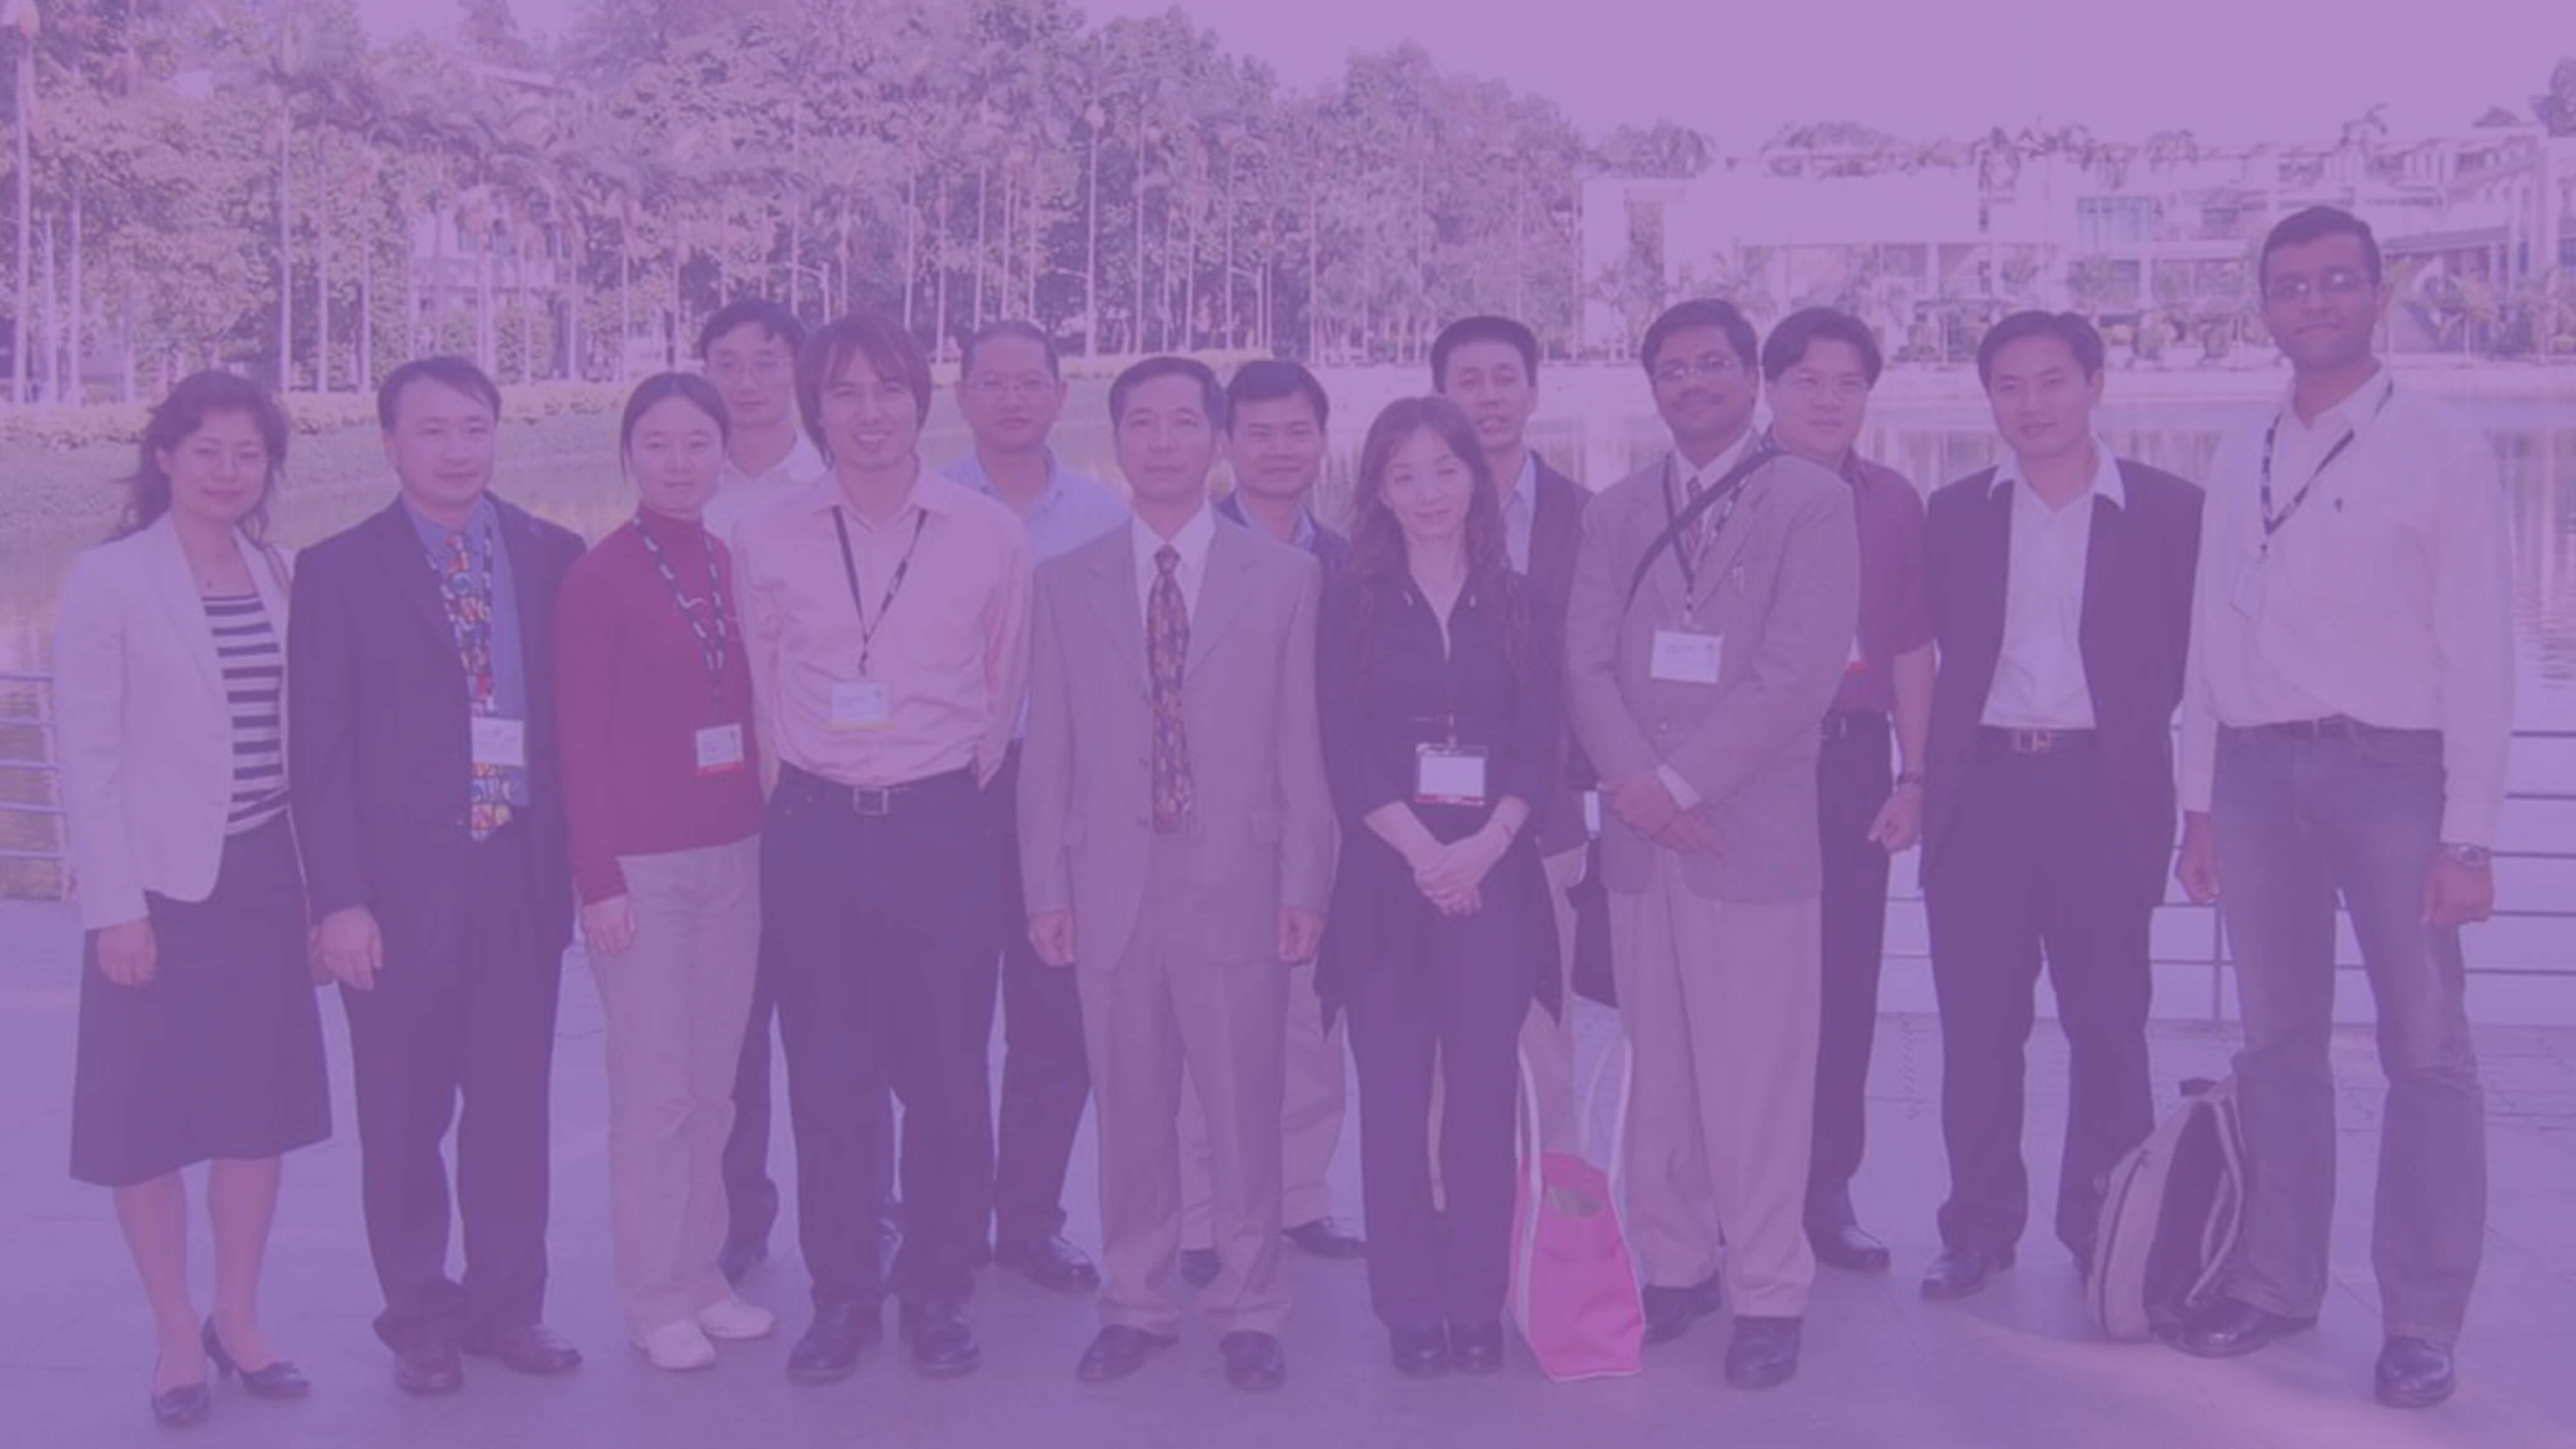 IEE Mobility -2005,China